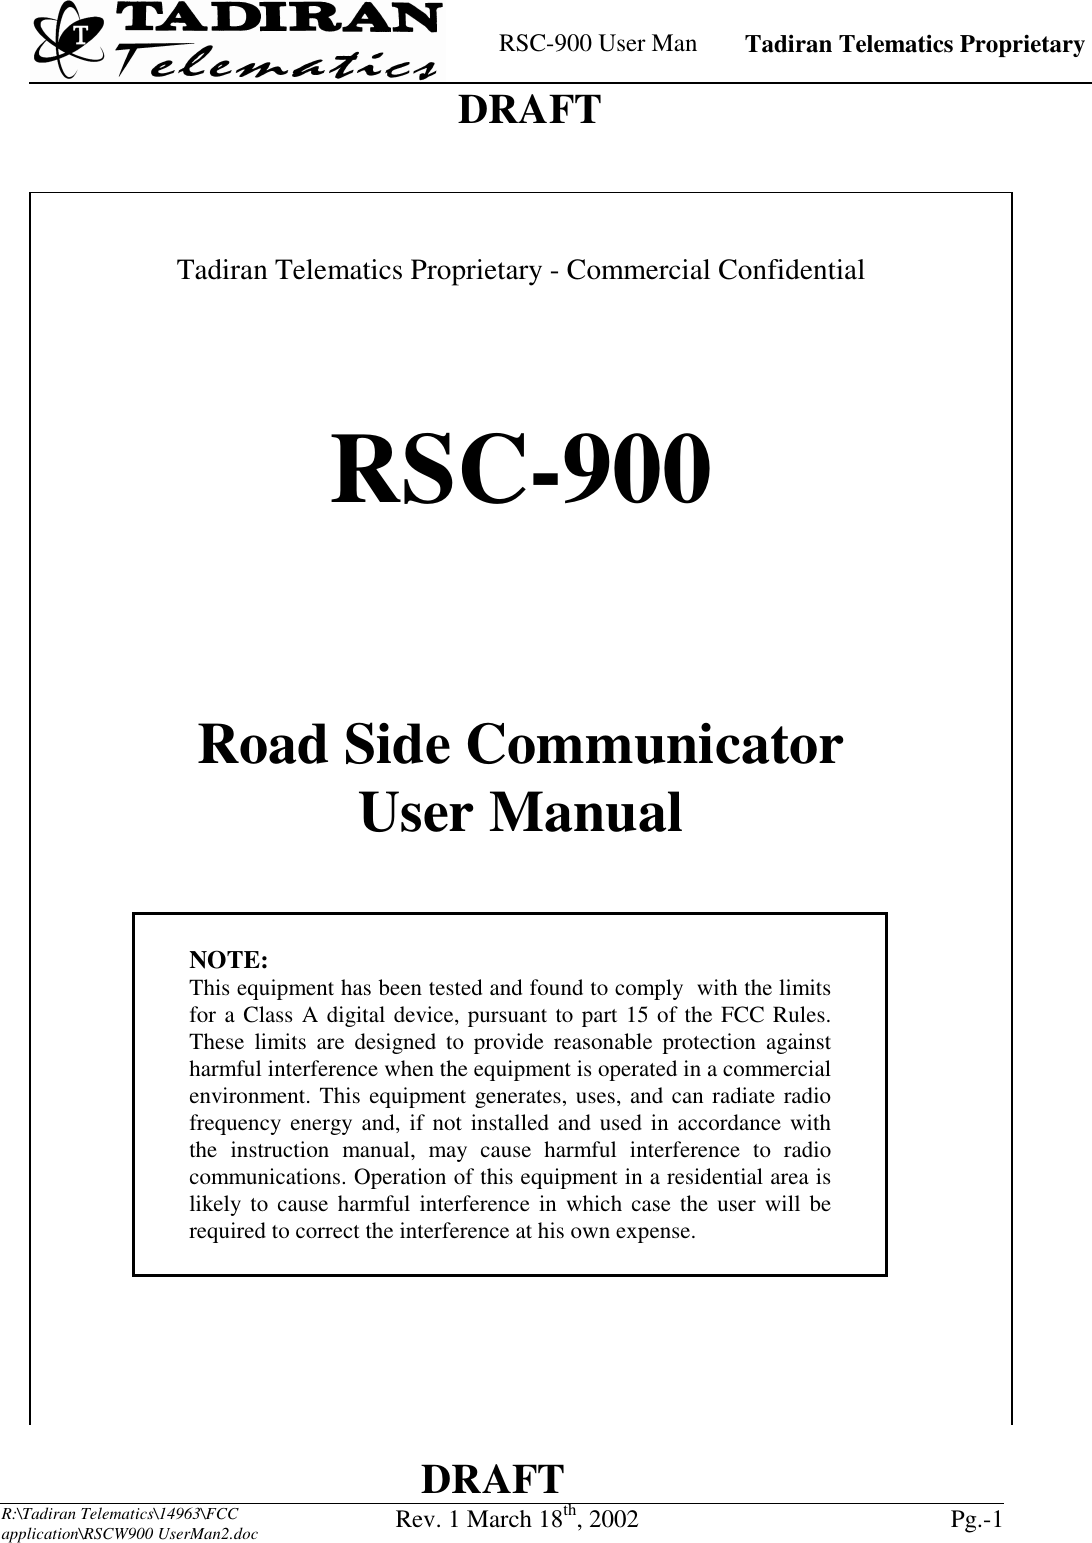    RSC-900 User Man   Tadiran Telematics Proprietary    DRAFT  DRAFT  R:\Tadiran Telematics\14963\FCC application\RSCW900 UserMan2.doc Rev. 1 March 18th, 2002  Pg.-1      Tadiran Telematics Proprietary - Commercial Confidential     RSC-900   Road Side Communicator User Manual     NOTE: This equipment has been tested and found to comply  with the limits for a Class A digital device, pursuant to part 15 of the FCC Rules. These limits are designed to provide reasonable protection against harmful interference when the equipment is operated in a commercial environment. This equipment generates, uses, and can radiate radio frequency energy and, if not installed and used in accordance with the instruction manual, may cause harmful interference to radio communications. Operation of this equipment in a residential area is likely to cause harmful interference in which case the user will be required to correct the interference at his own expense.         